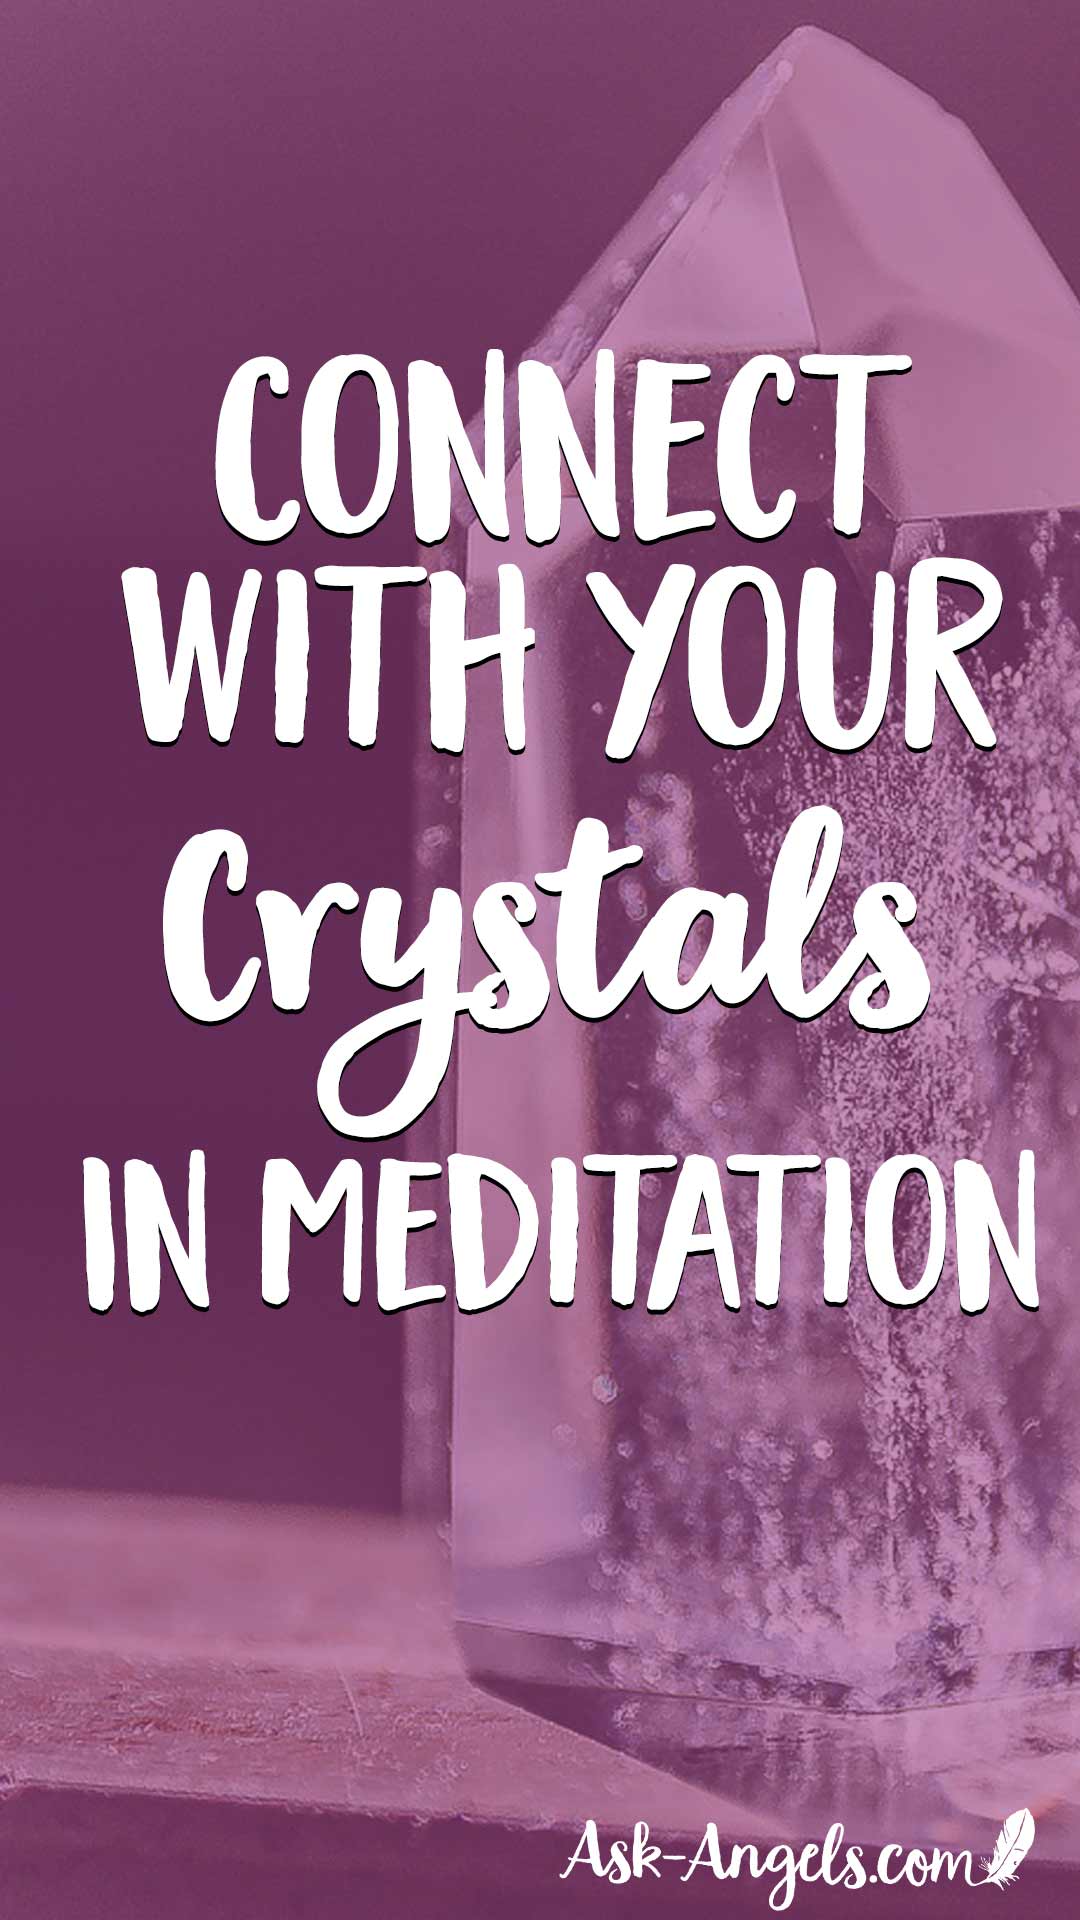 Learn a simple meditation technique to connect with your crystals in meditation